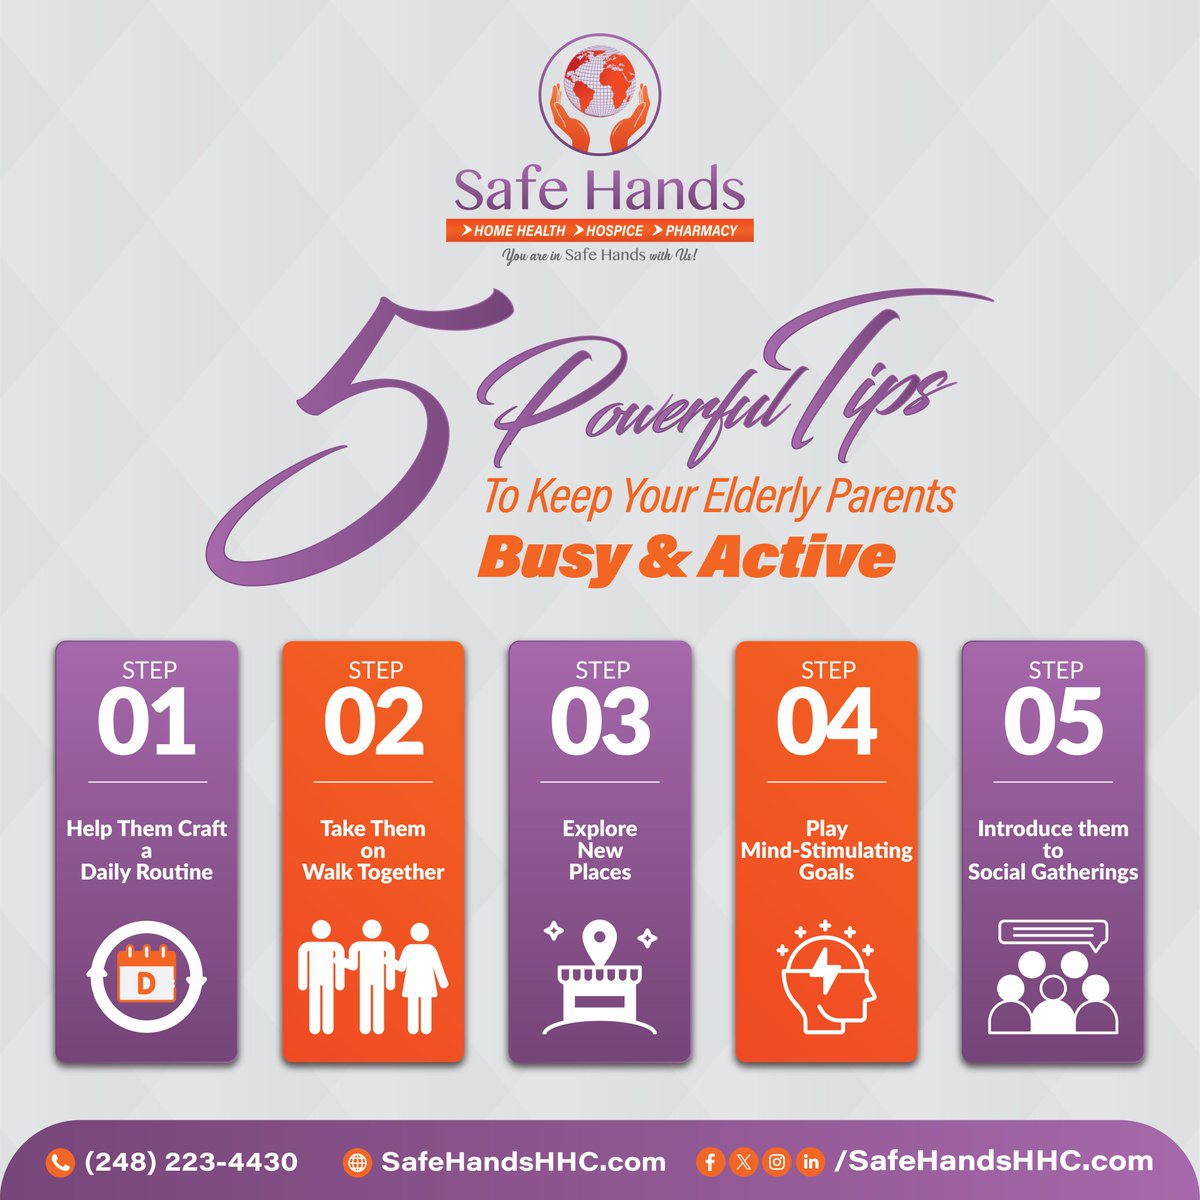 At Safe Hands, we believe in the power of an active mind and body, no matter the age. Here's our 5-step recipe for keeping your elderly parents bustling with life! 📅🤾‍♂️

Feel free to contact us now: +1 (248) 223-4430
or
Visit us: safehandshhc.com

#SafeHandsHHC #Healthcare